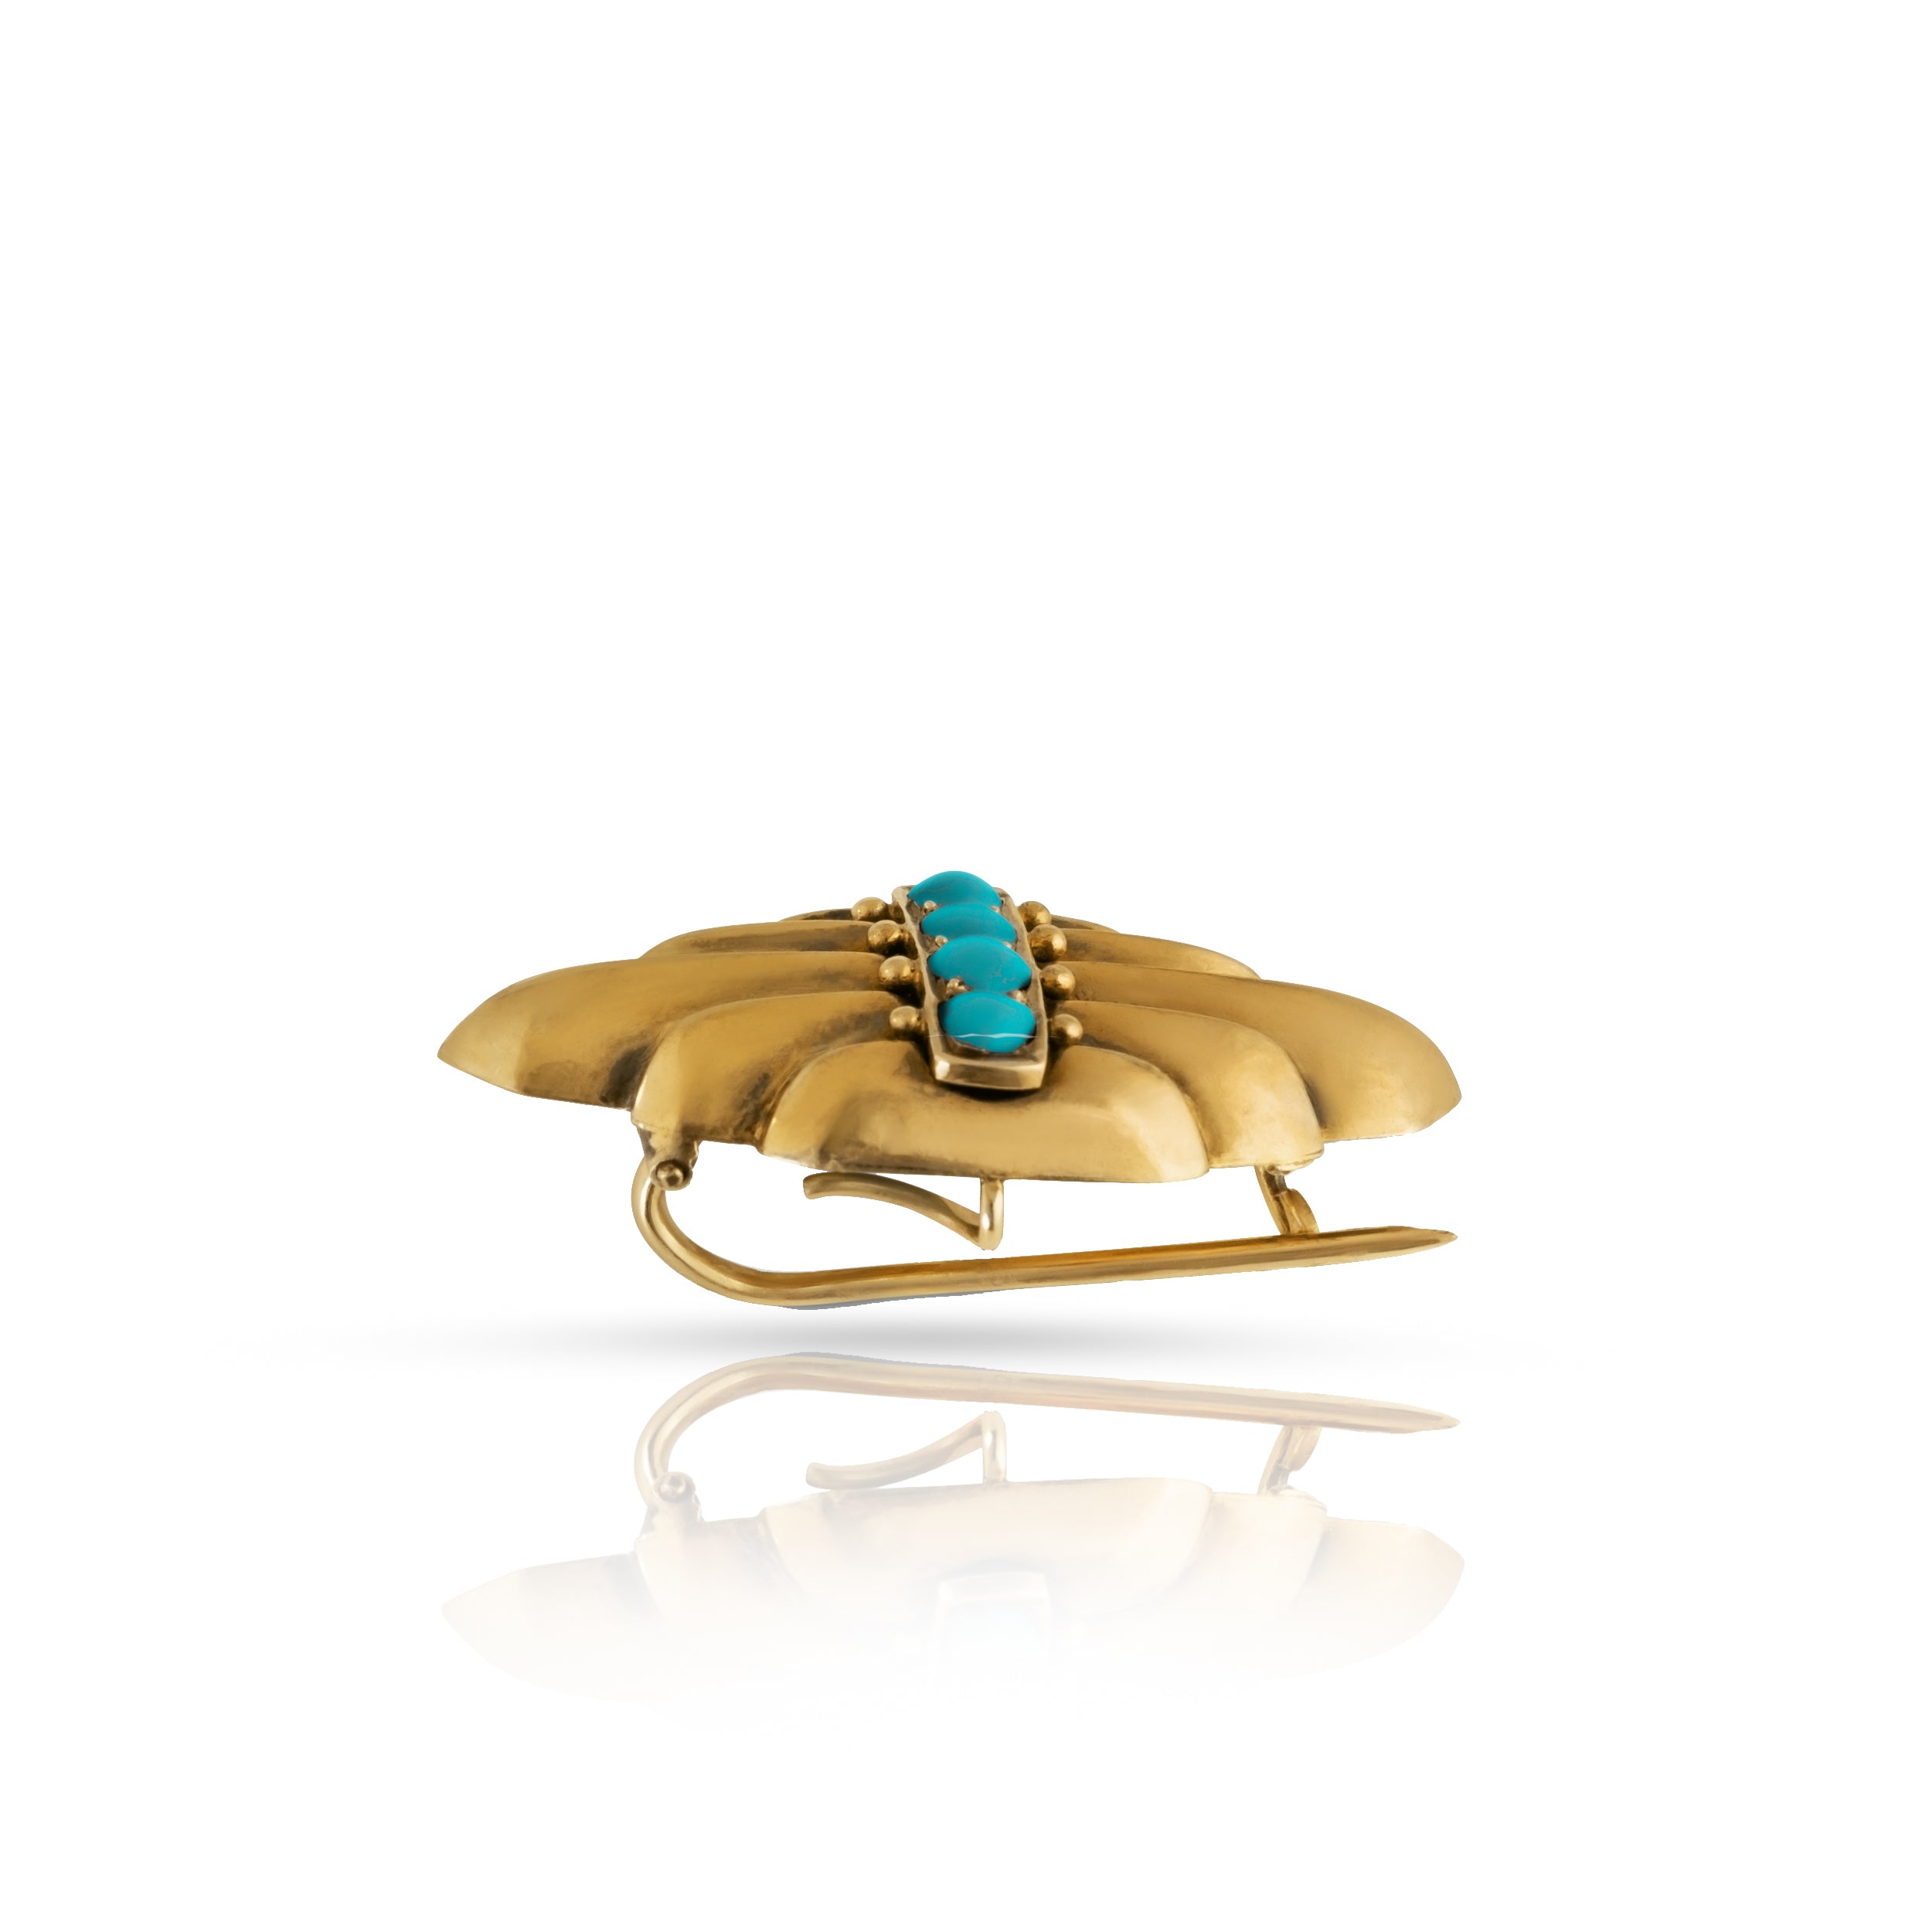 Side view of gold and turquoise brooch.